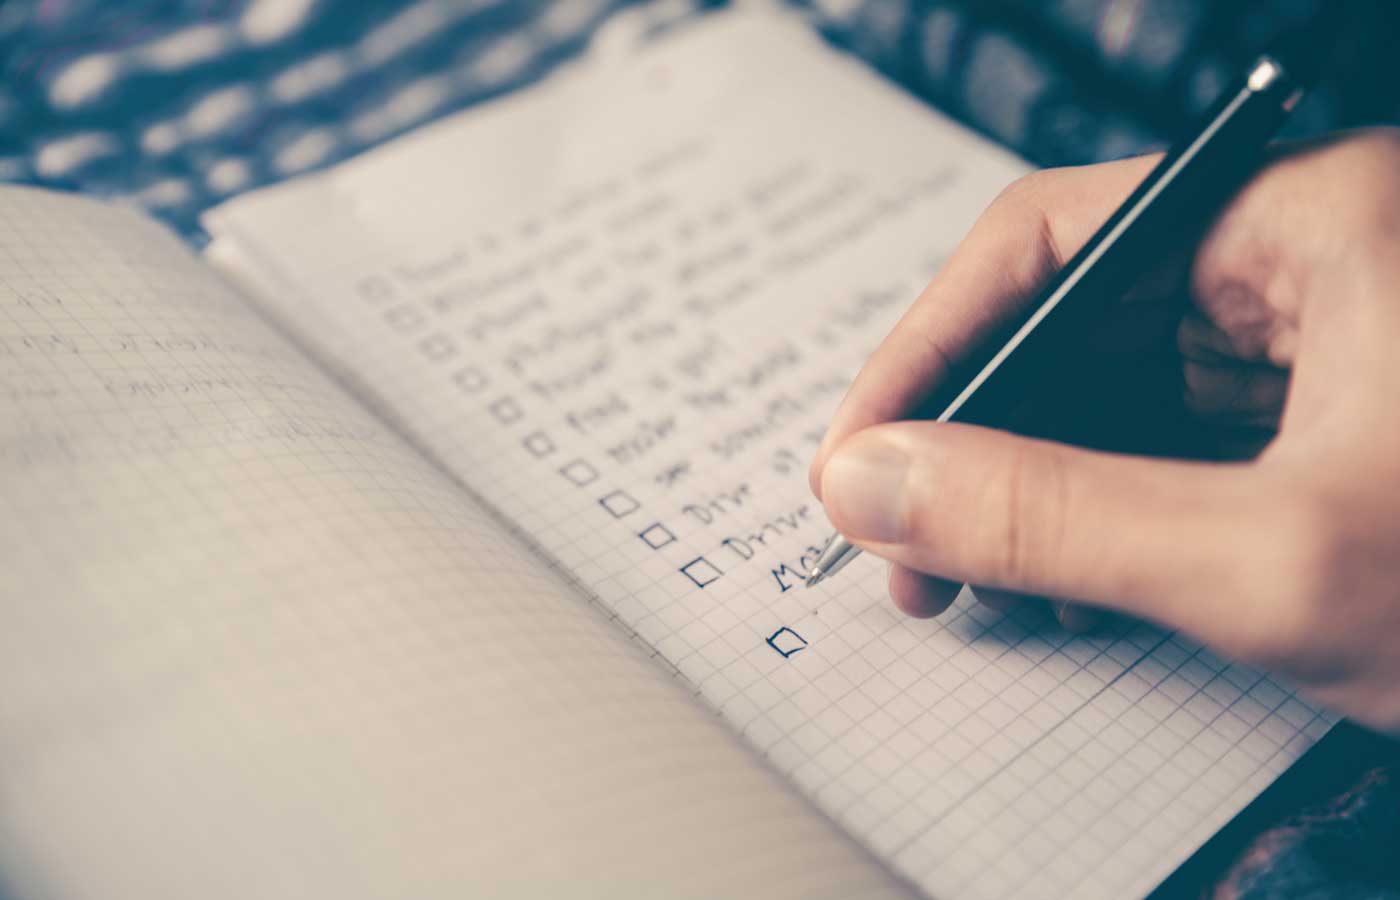 Organising a large event - Shows a person writing a checklist